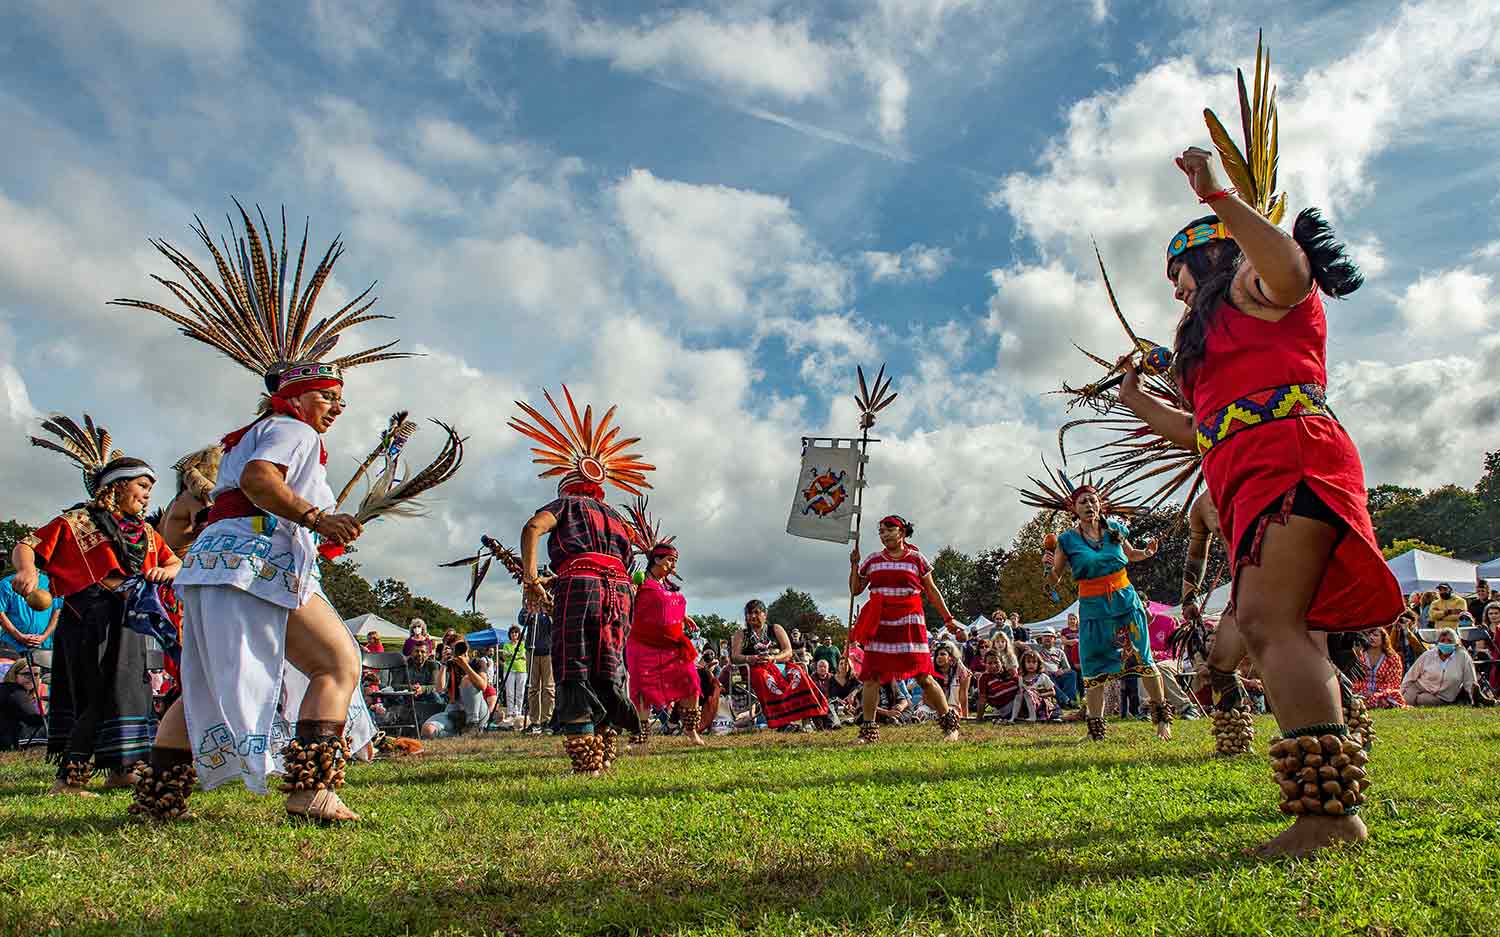 People in the clothing of an American Indian nation perform a dance outdoors